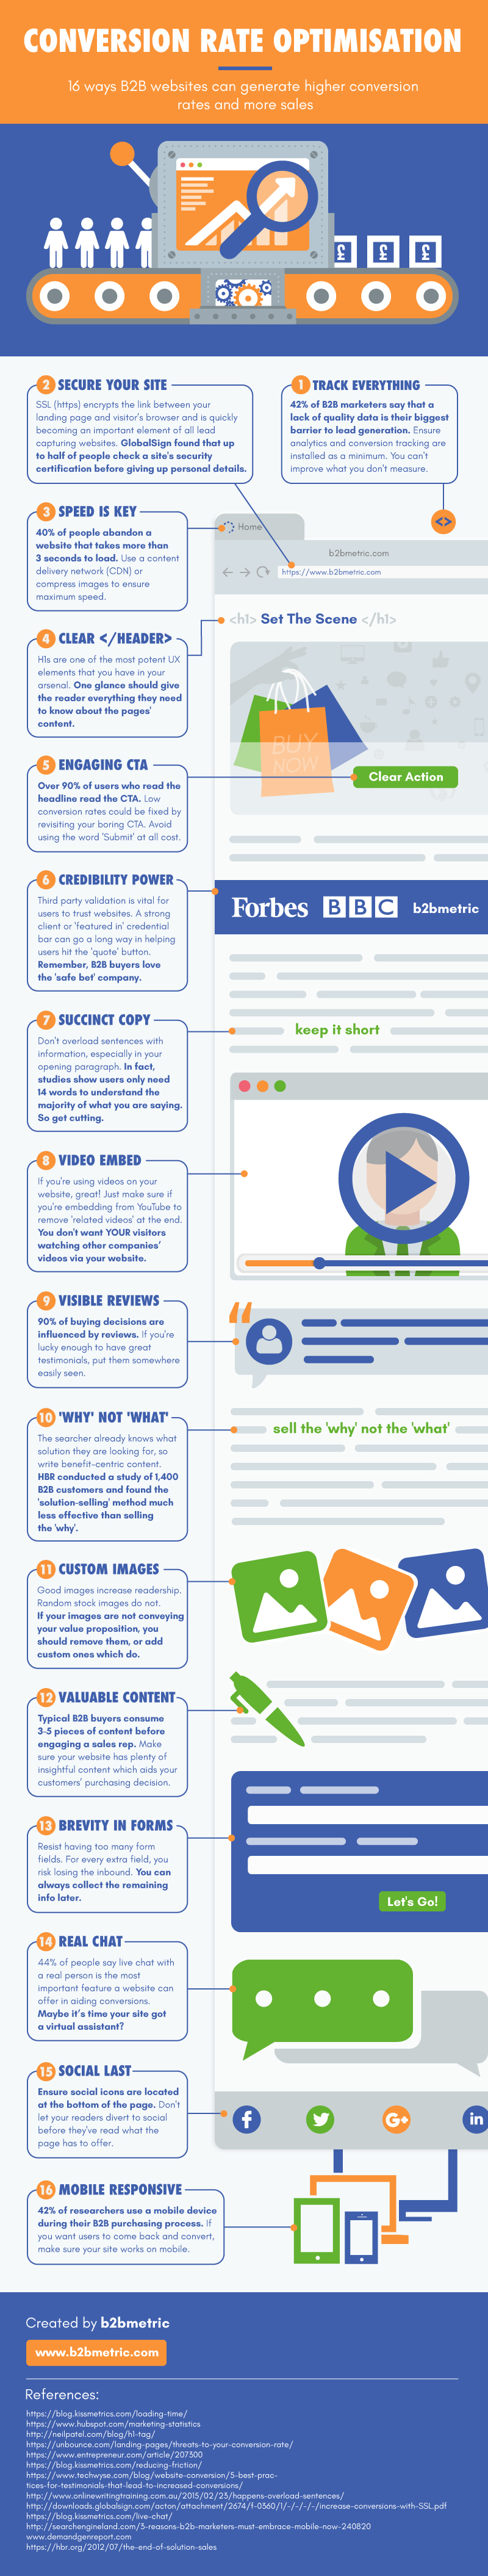 Infographic: 16 Ways to Improve Your Website Conversion Rates